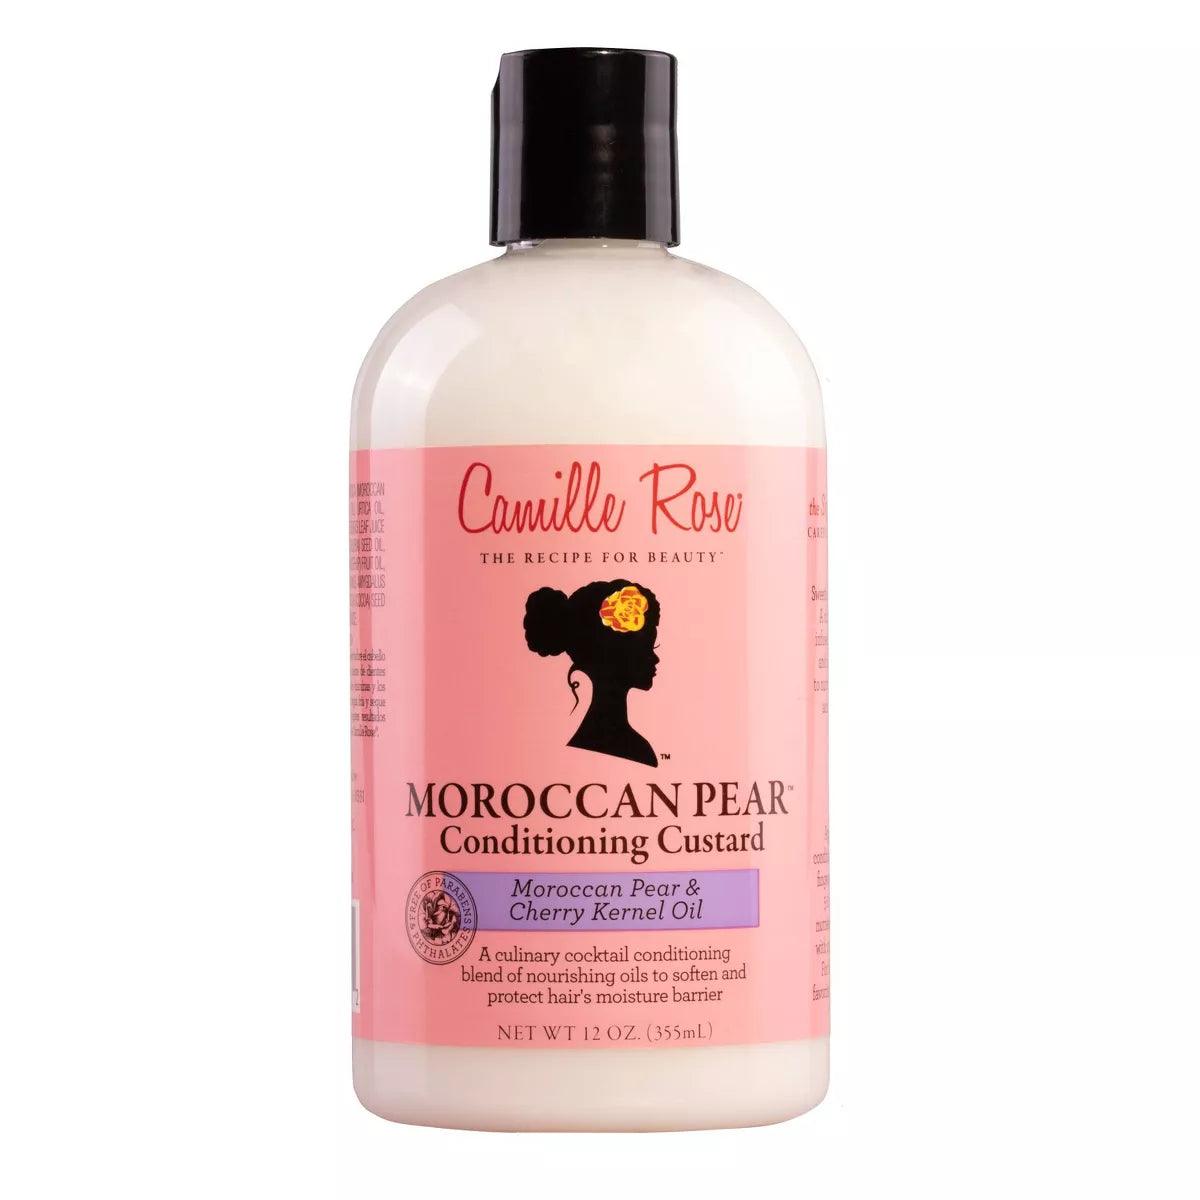 Camille Rose Moroccan Pear Conditioning Custard - 12oz - USA Beauty